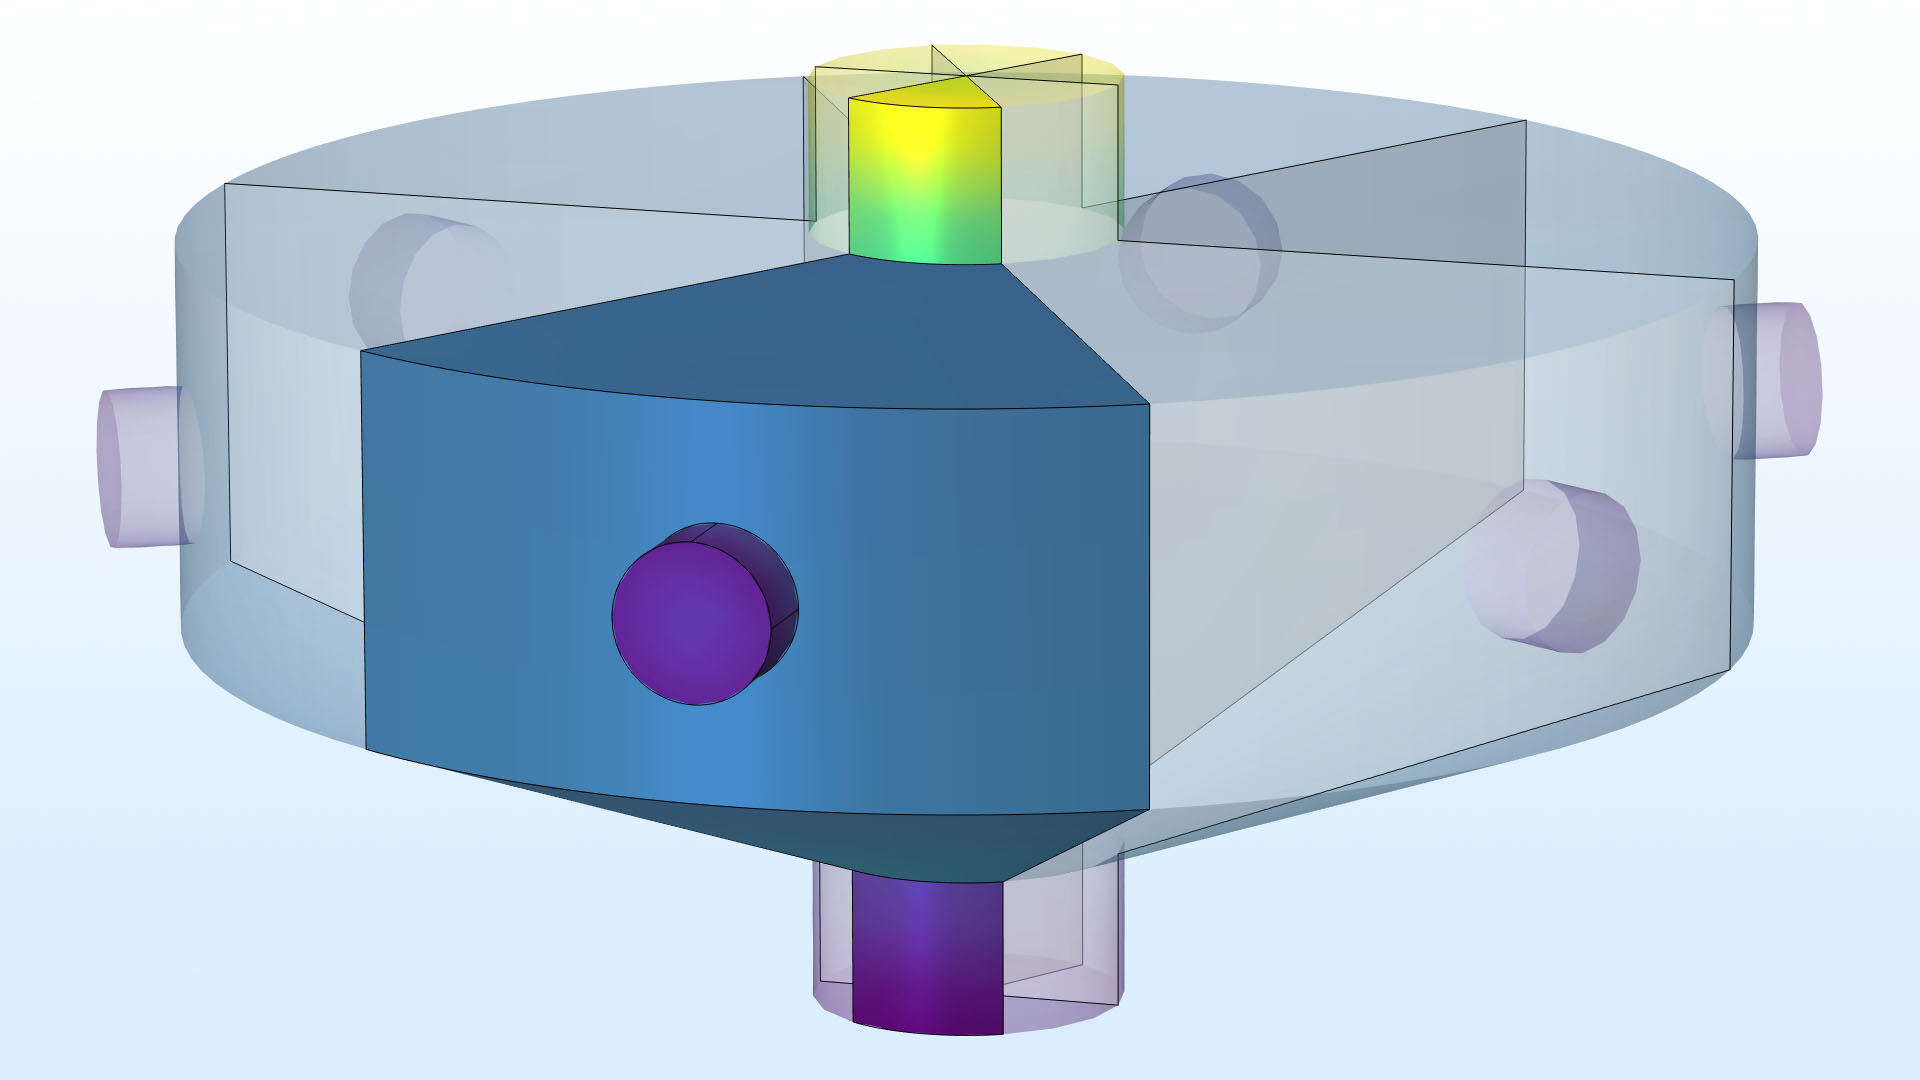 A 3D model with six sectors where five are transparent and one is solid.